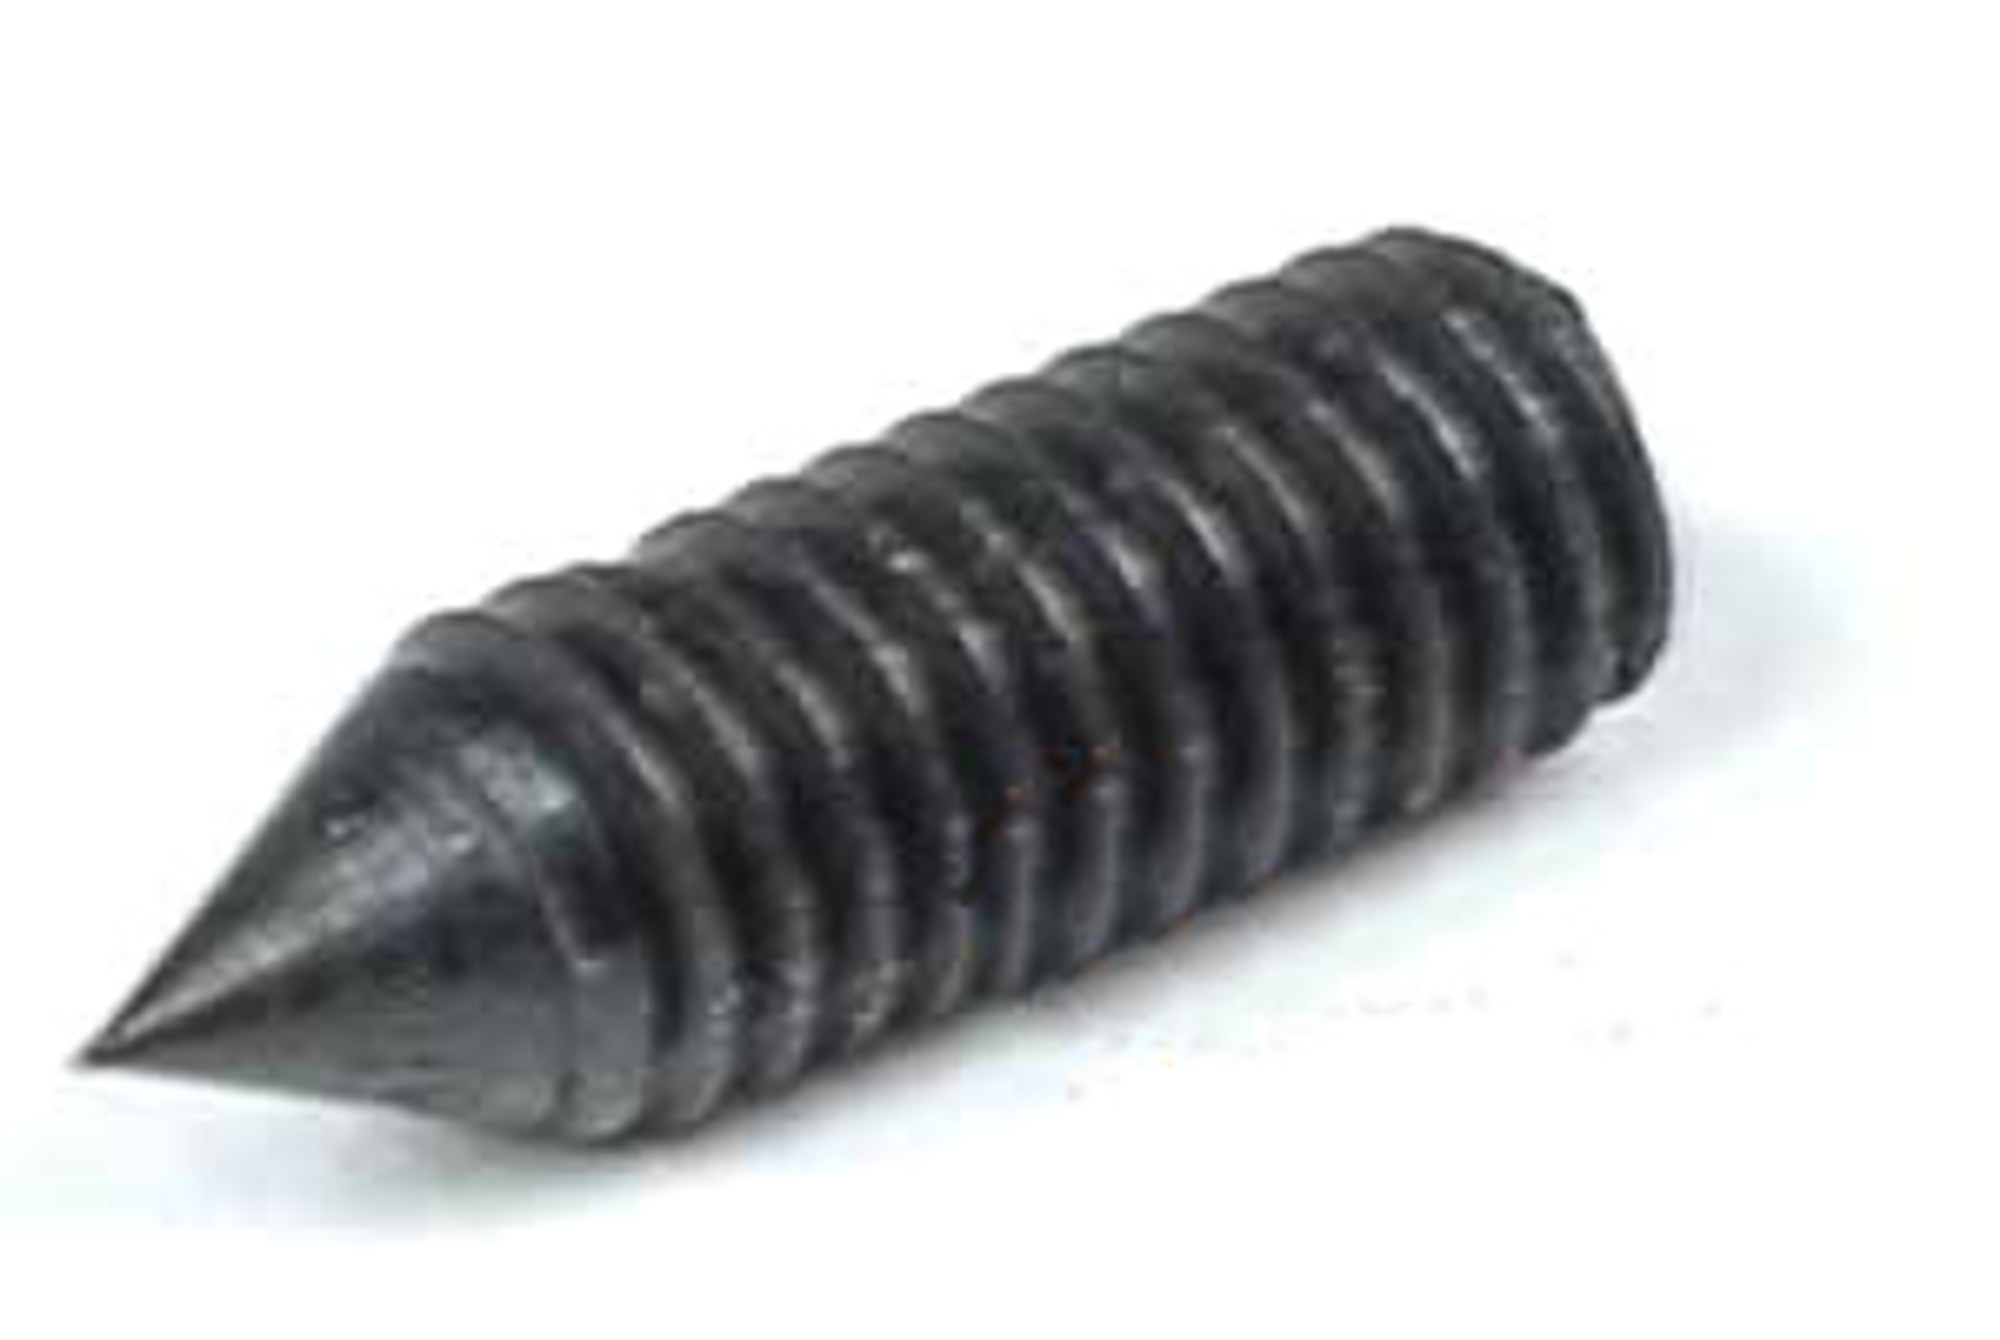 KJW Replacement Hopup Adjustment Screw for Airsoft M700 Sniper Rifle Series (Part #111)